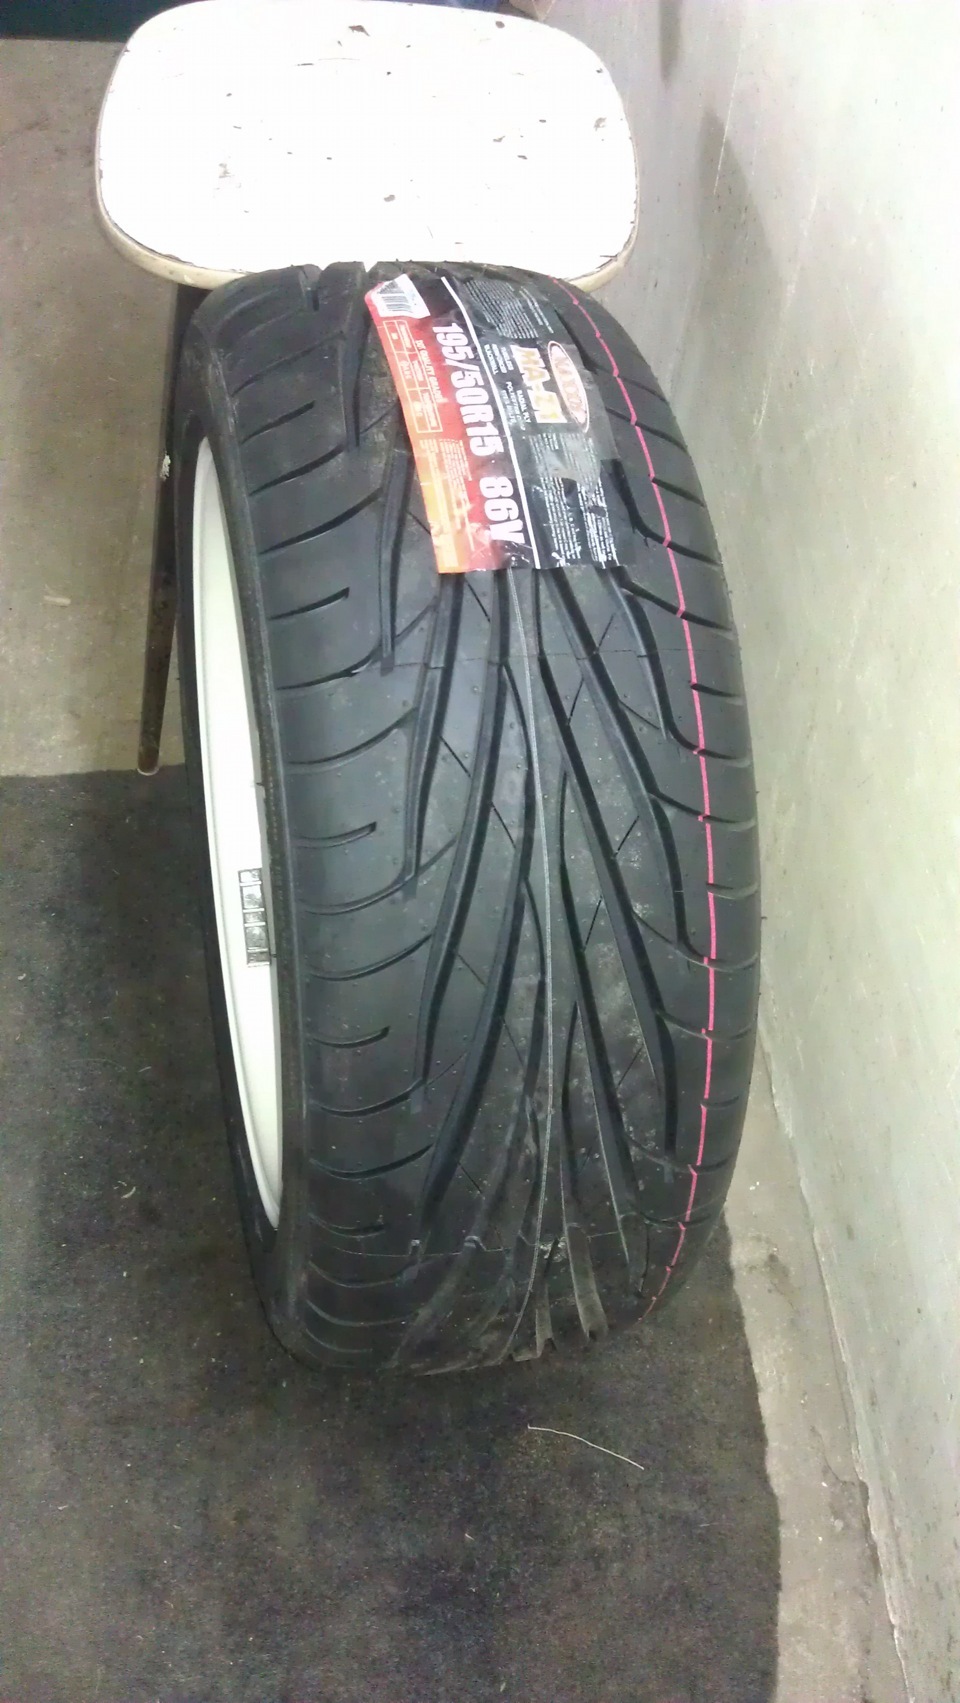 Шины максис виктра. Maxxis z1 Victra 195/50. Maxxis ma-z1 Victra 195/50 r15. Maxxis r1 195 50r15. Резина Maxxis 195/50 r15.